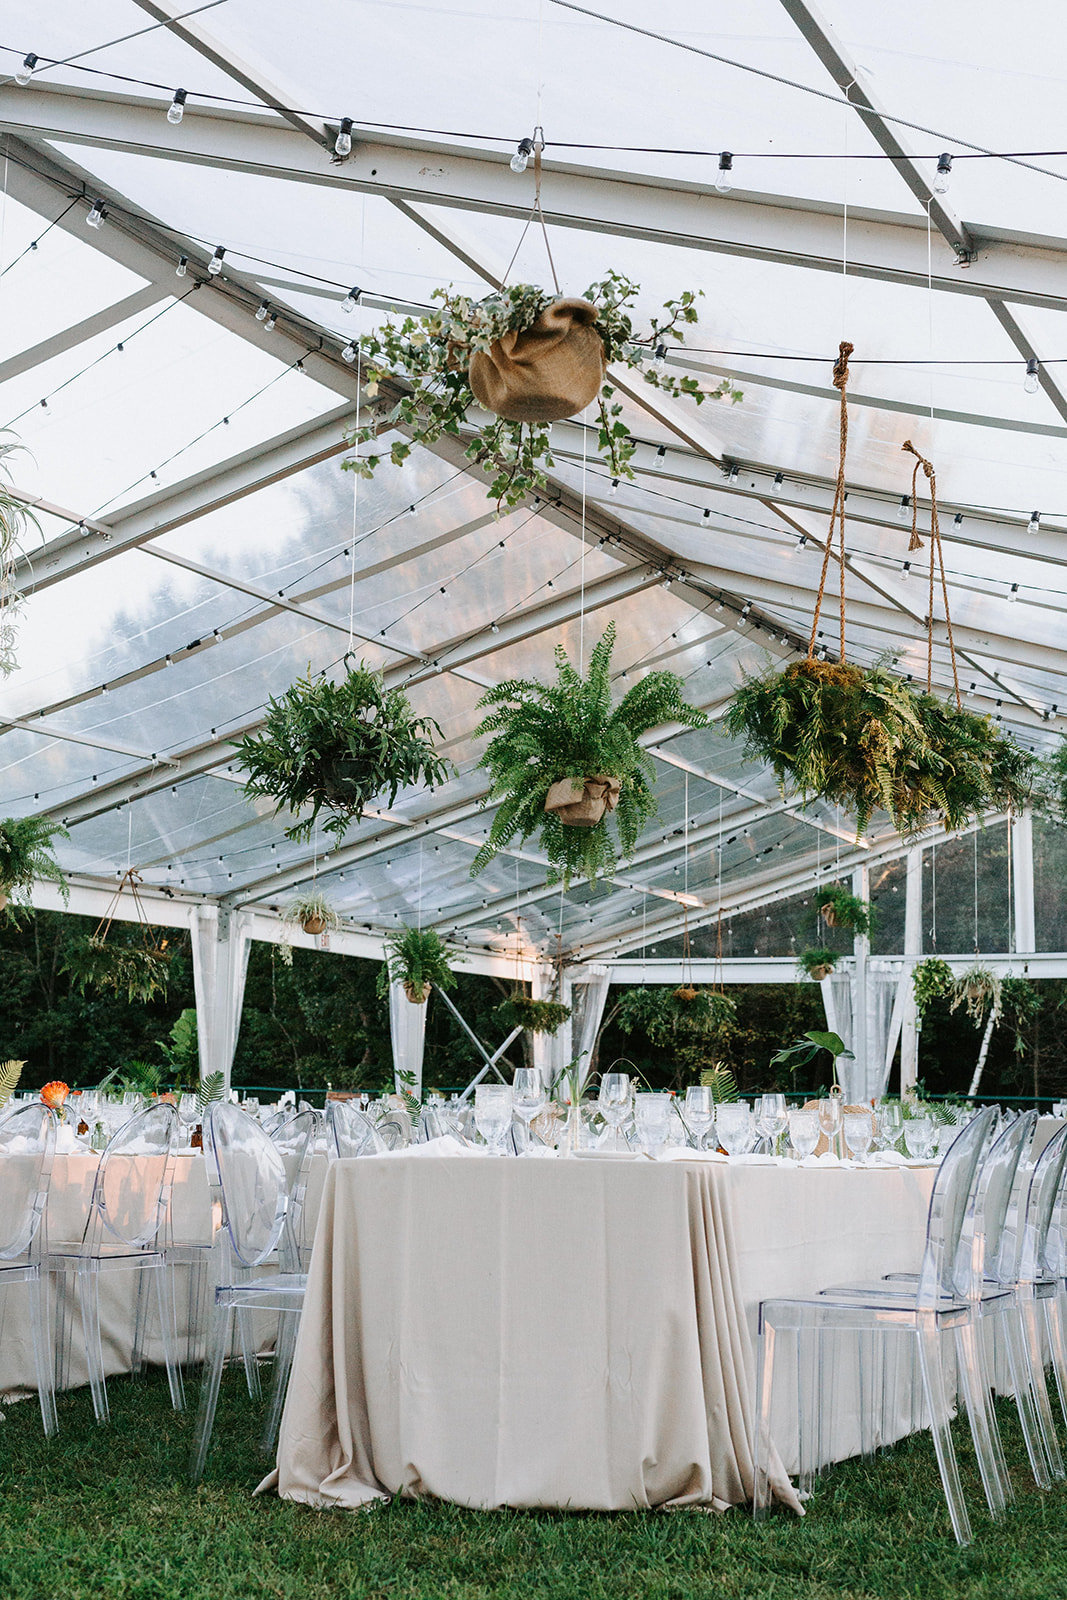 Monica-Relyea-Events-Hyde-Photography-Camp-Scatico-Wedding-Upstate-New-York-NY-Hudson-Valley-Elizaville-Tivoli-Tropical-Clear-Tent-Outdoor-NYC-Planner-Fall-Jewish-617